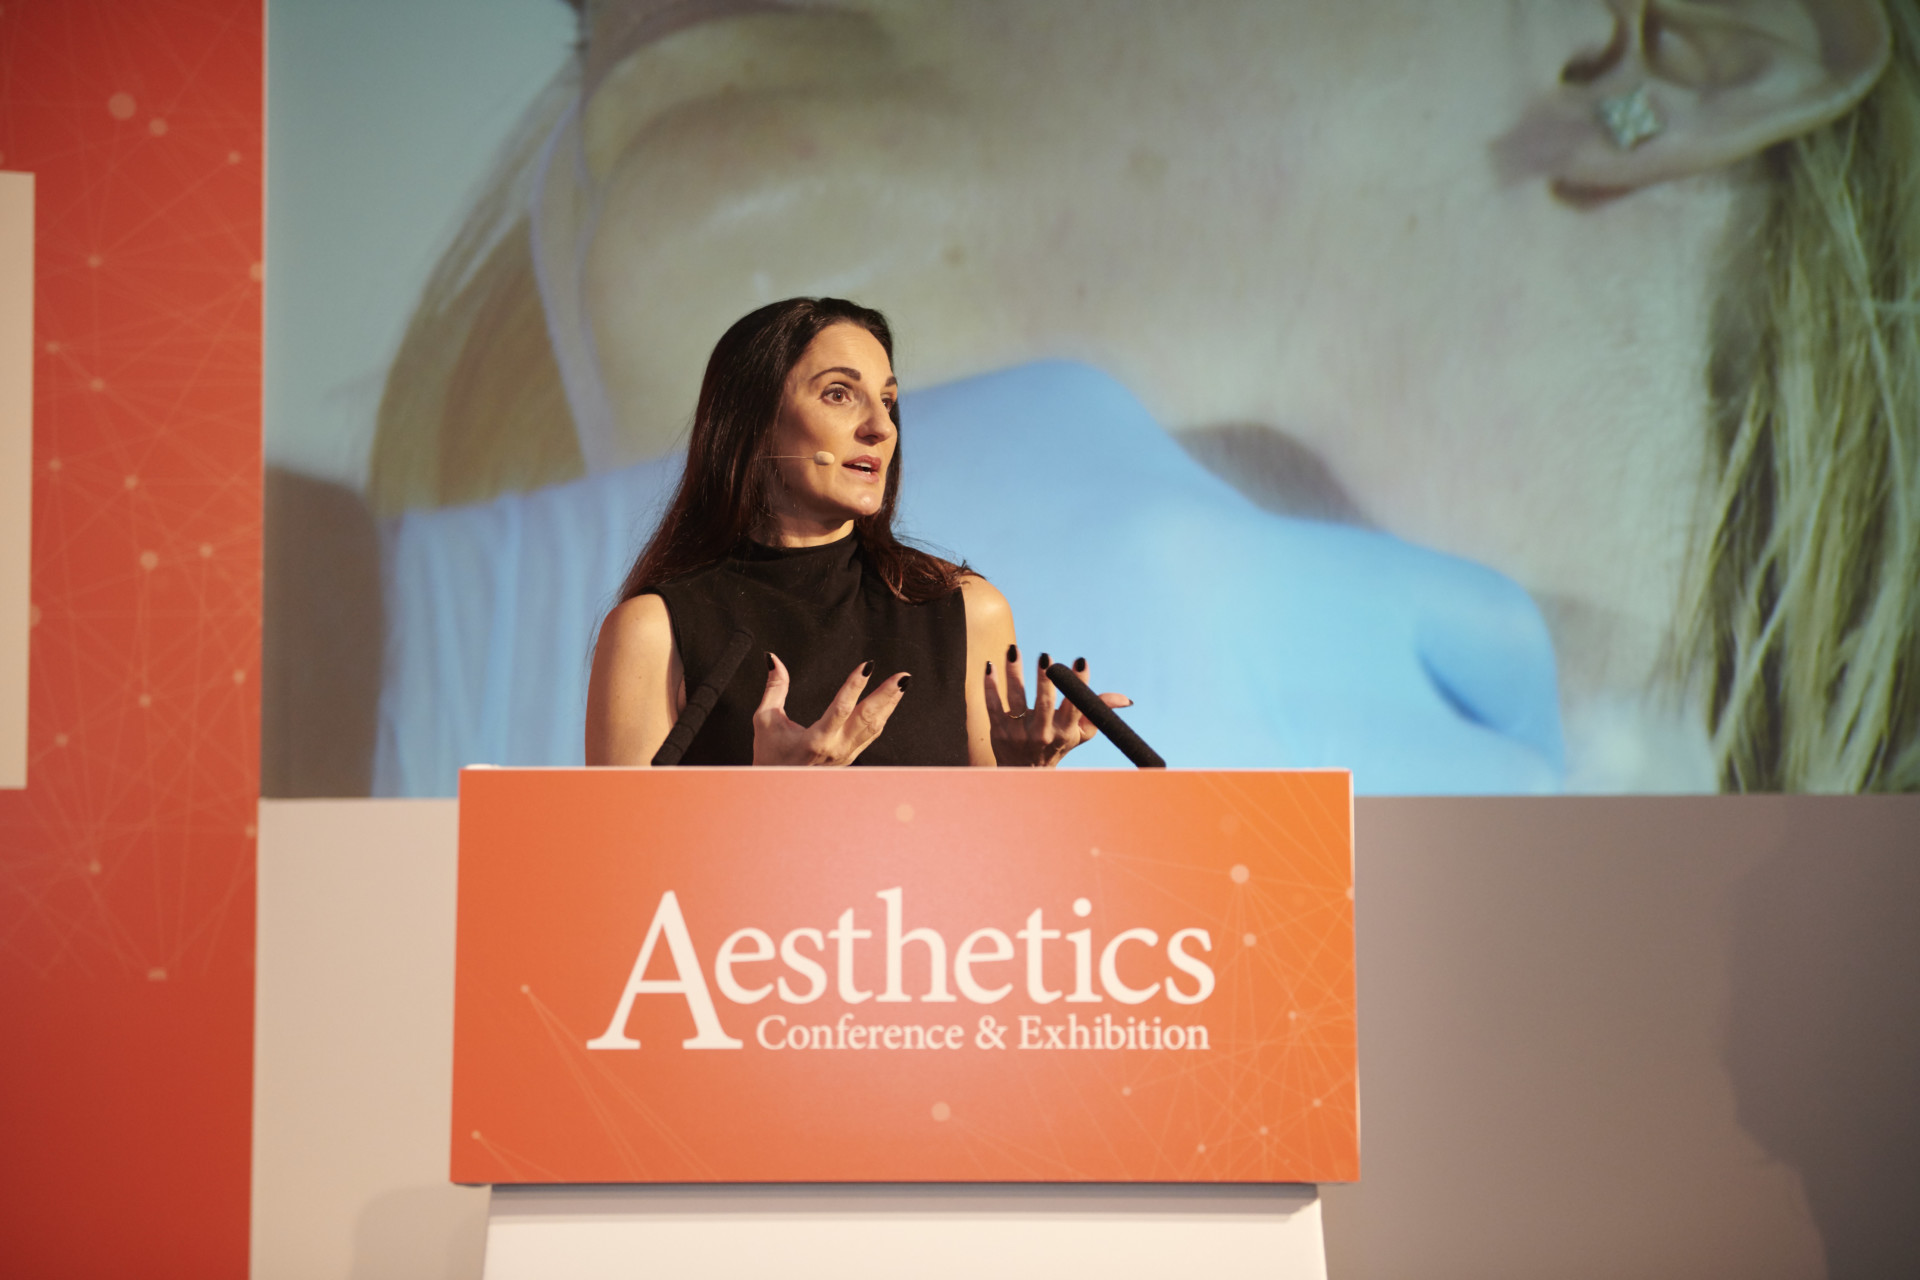 Aesthetics Conference and Exhibition further posponed